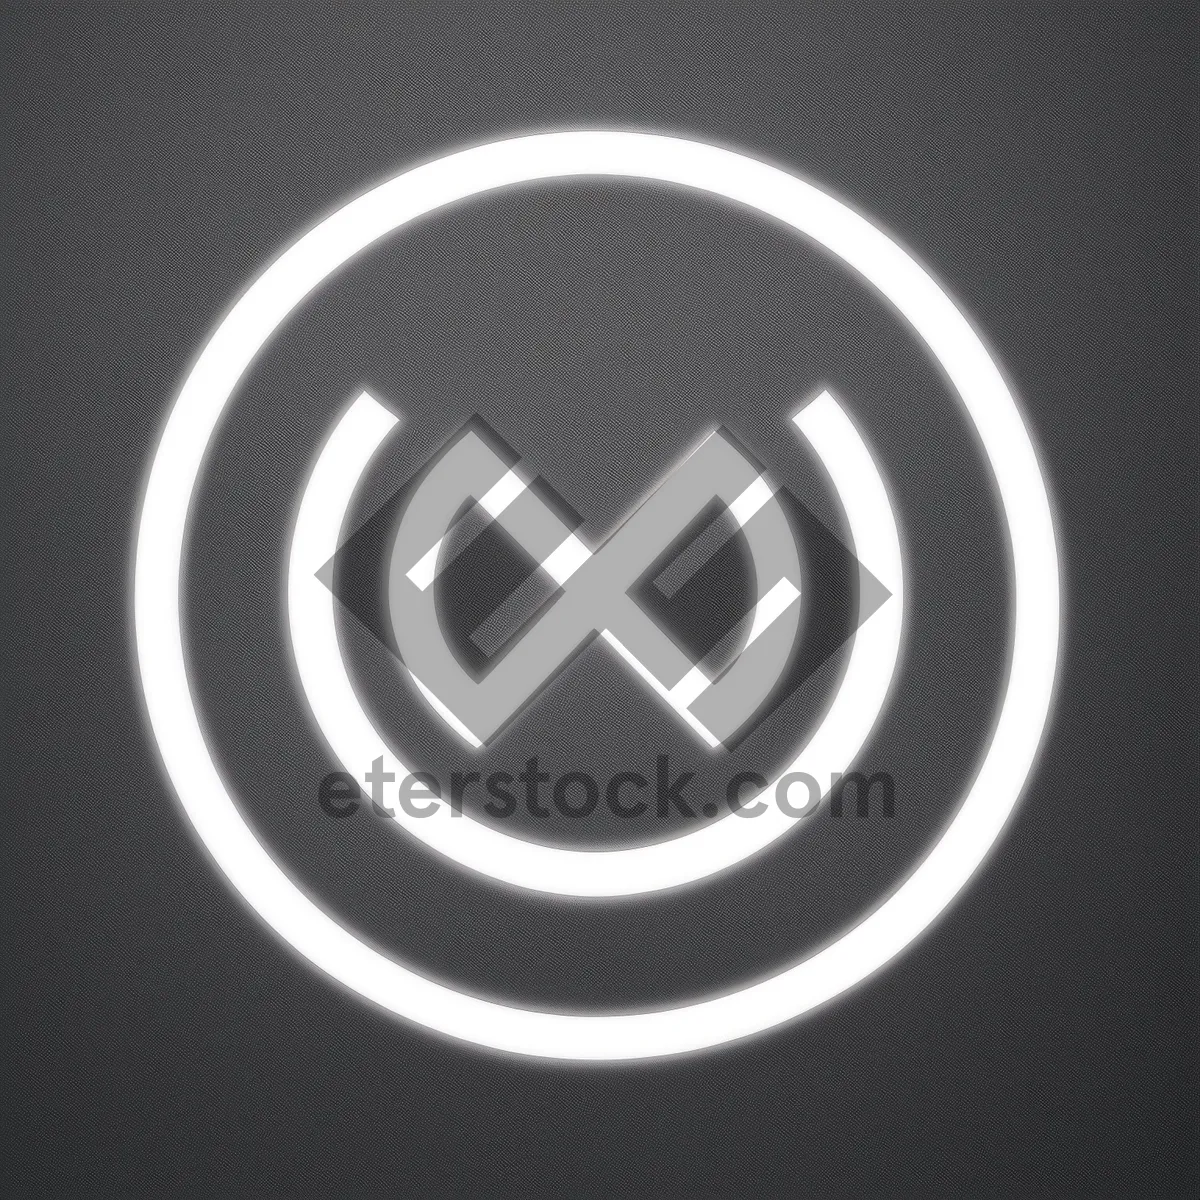 Picture of Modern glossy button icon with shiny black metal finish.